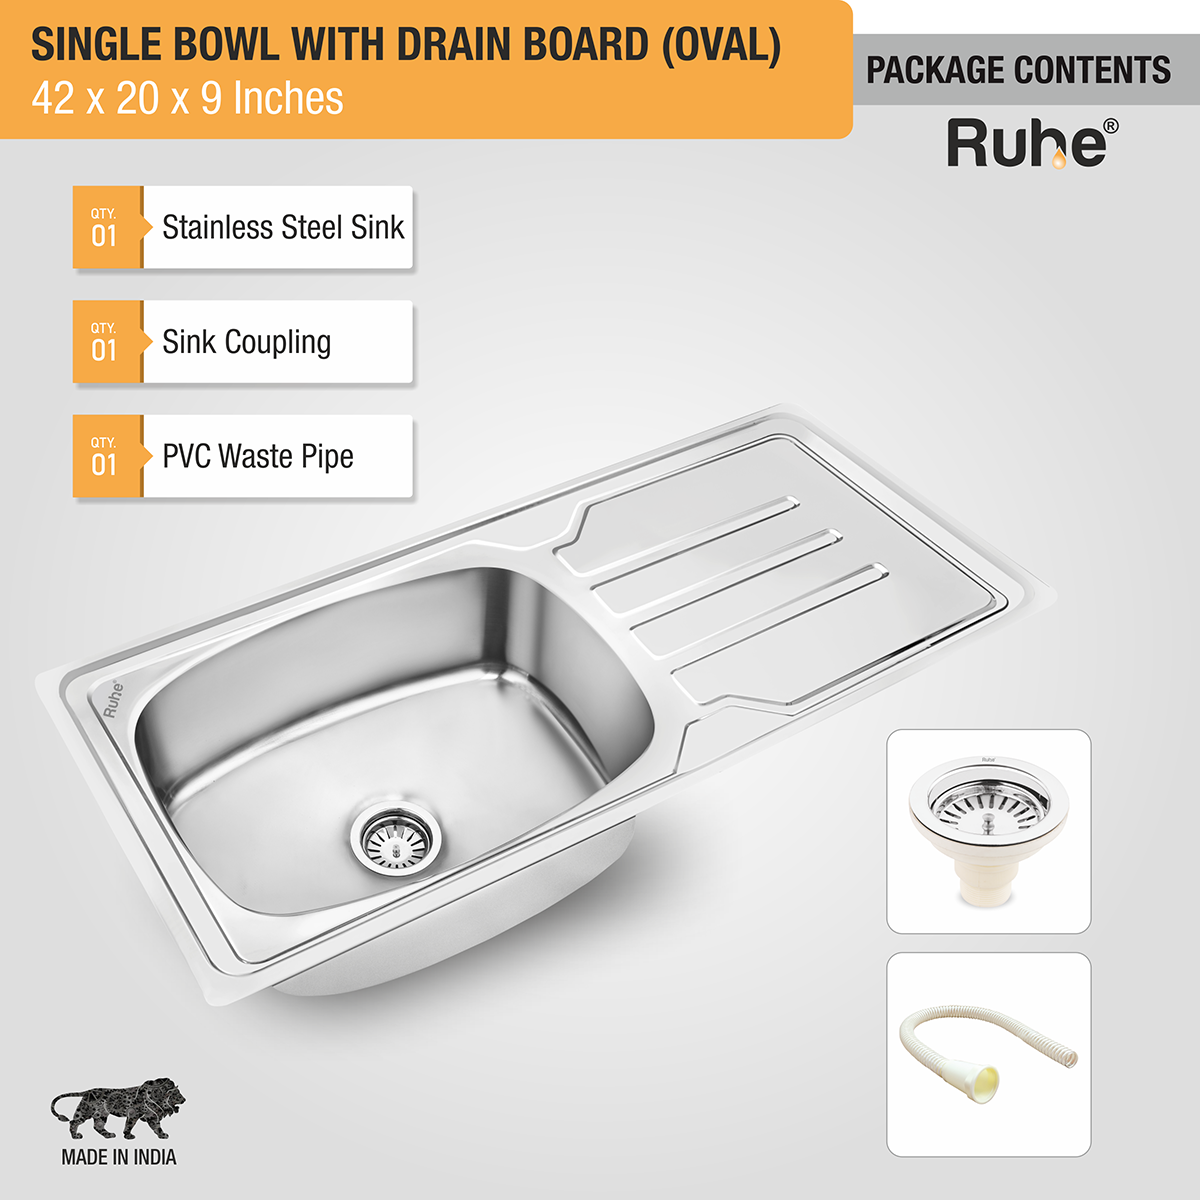 Oval Single Bowl (42 x 20 x 9 inches) Premium Stainless Steel Kitchen Sink with Drainboard package